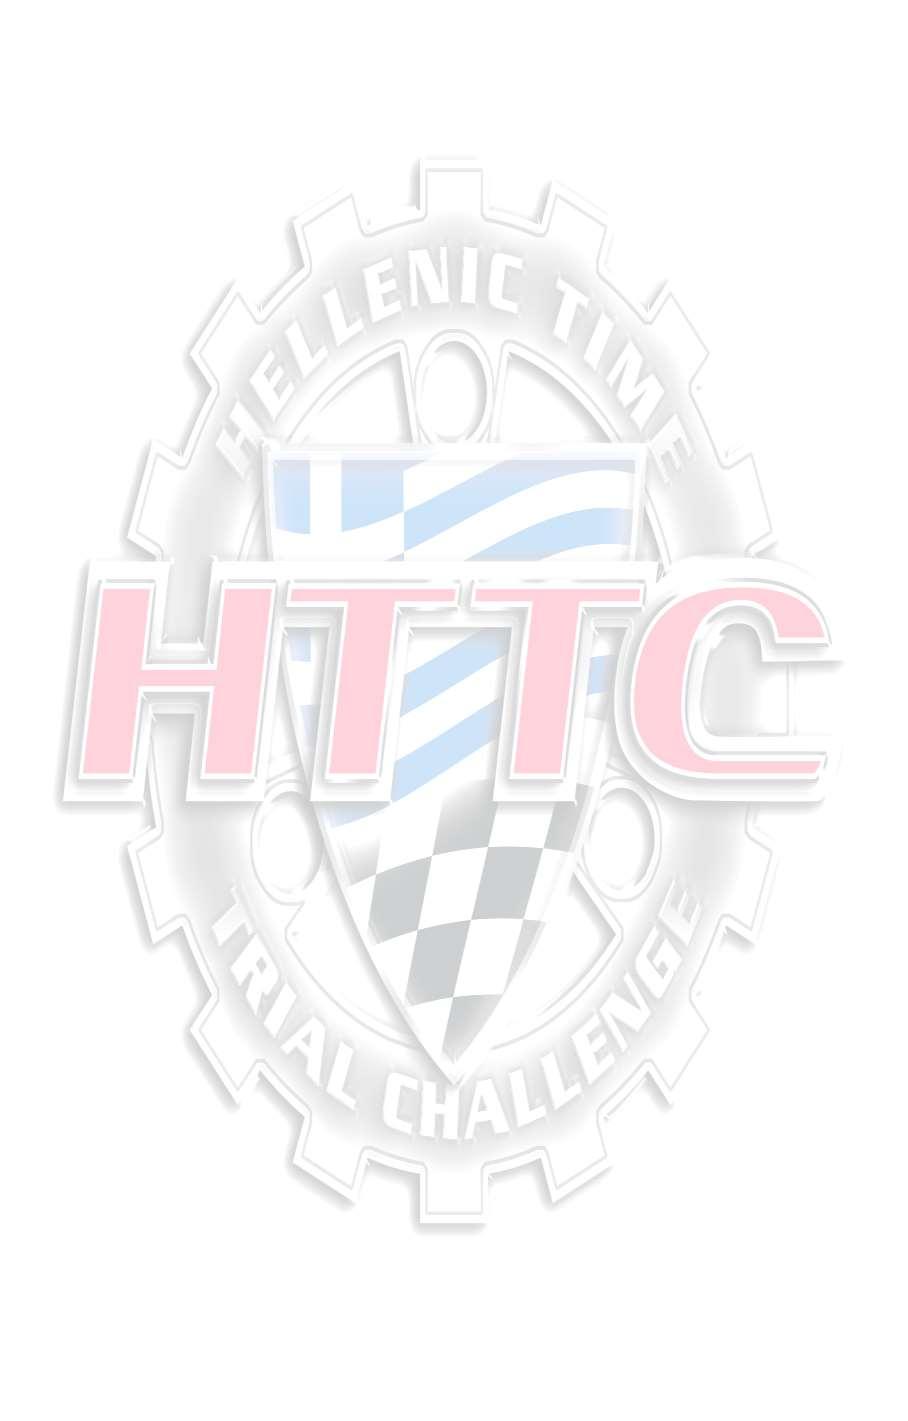 Hellenic Time Trial Challenge